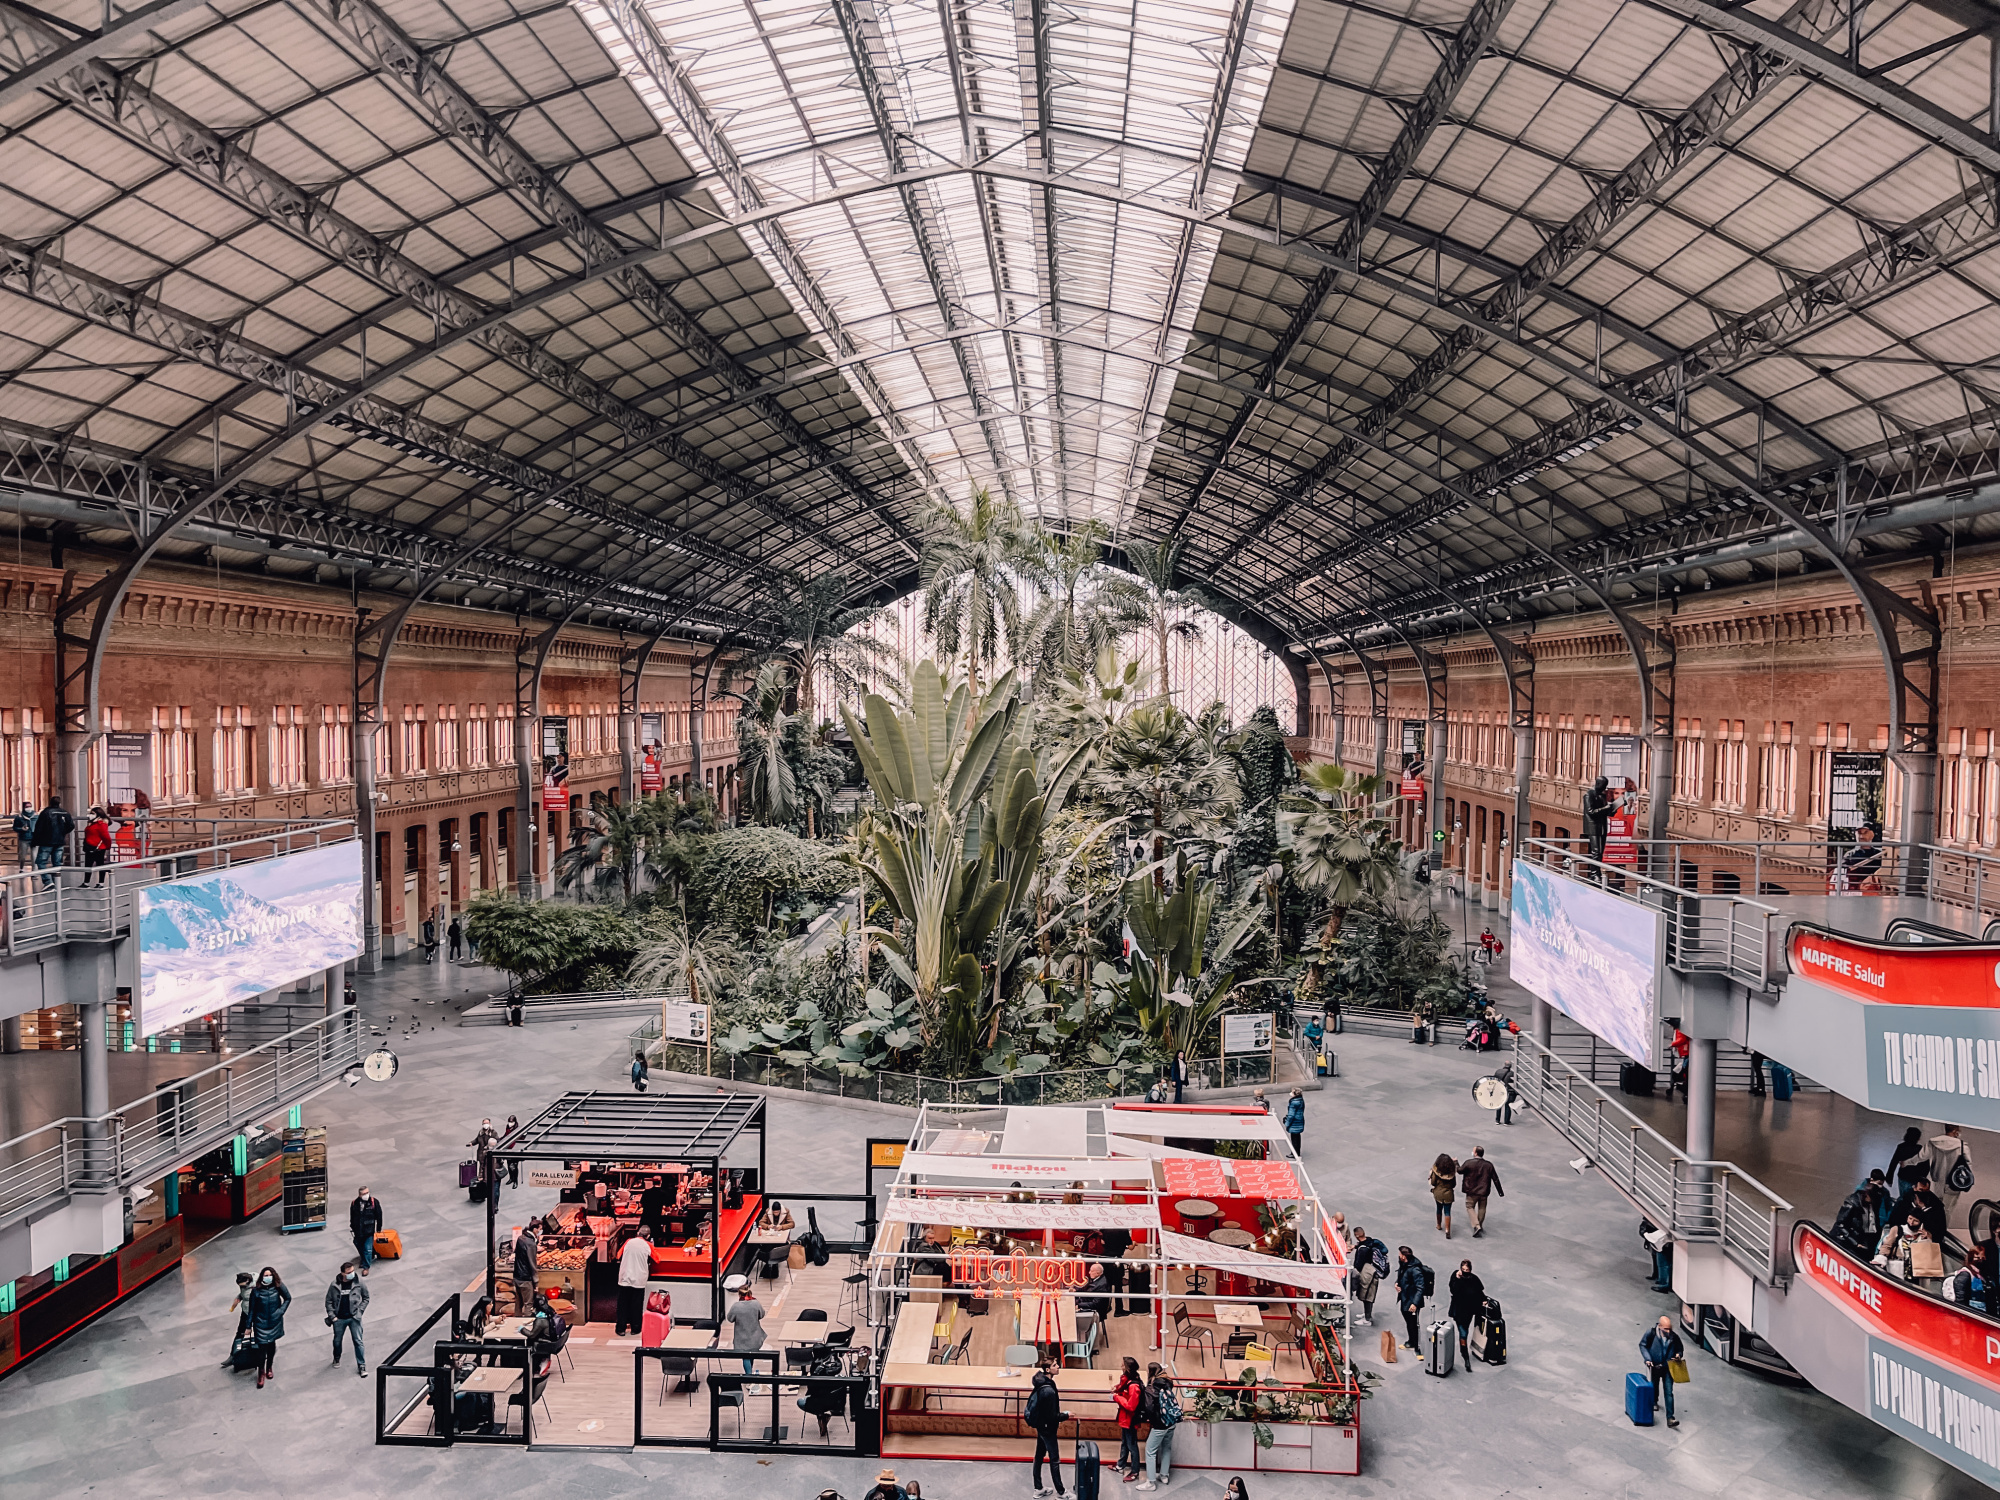 weekend trips from spain, weekend trips from madrid, where to visit near spain, best weekend trips from madrid, erin busbee, sevilla, spain, high speed train madrid to sevilla, atocha train station